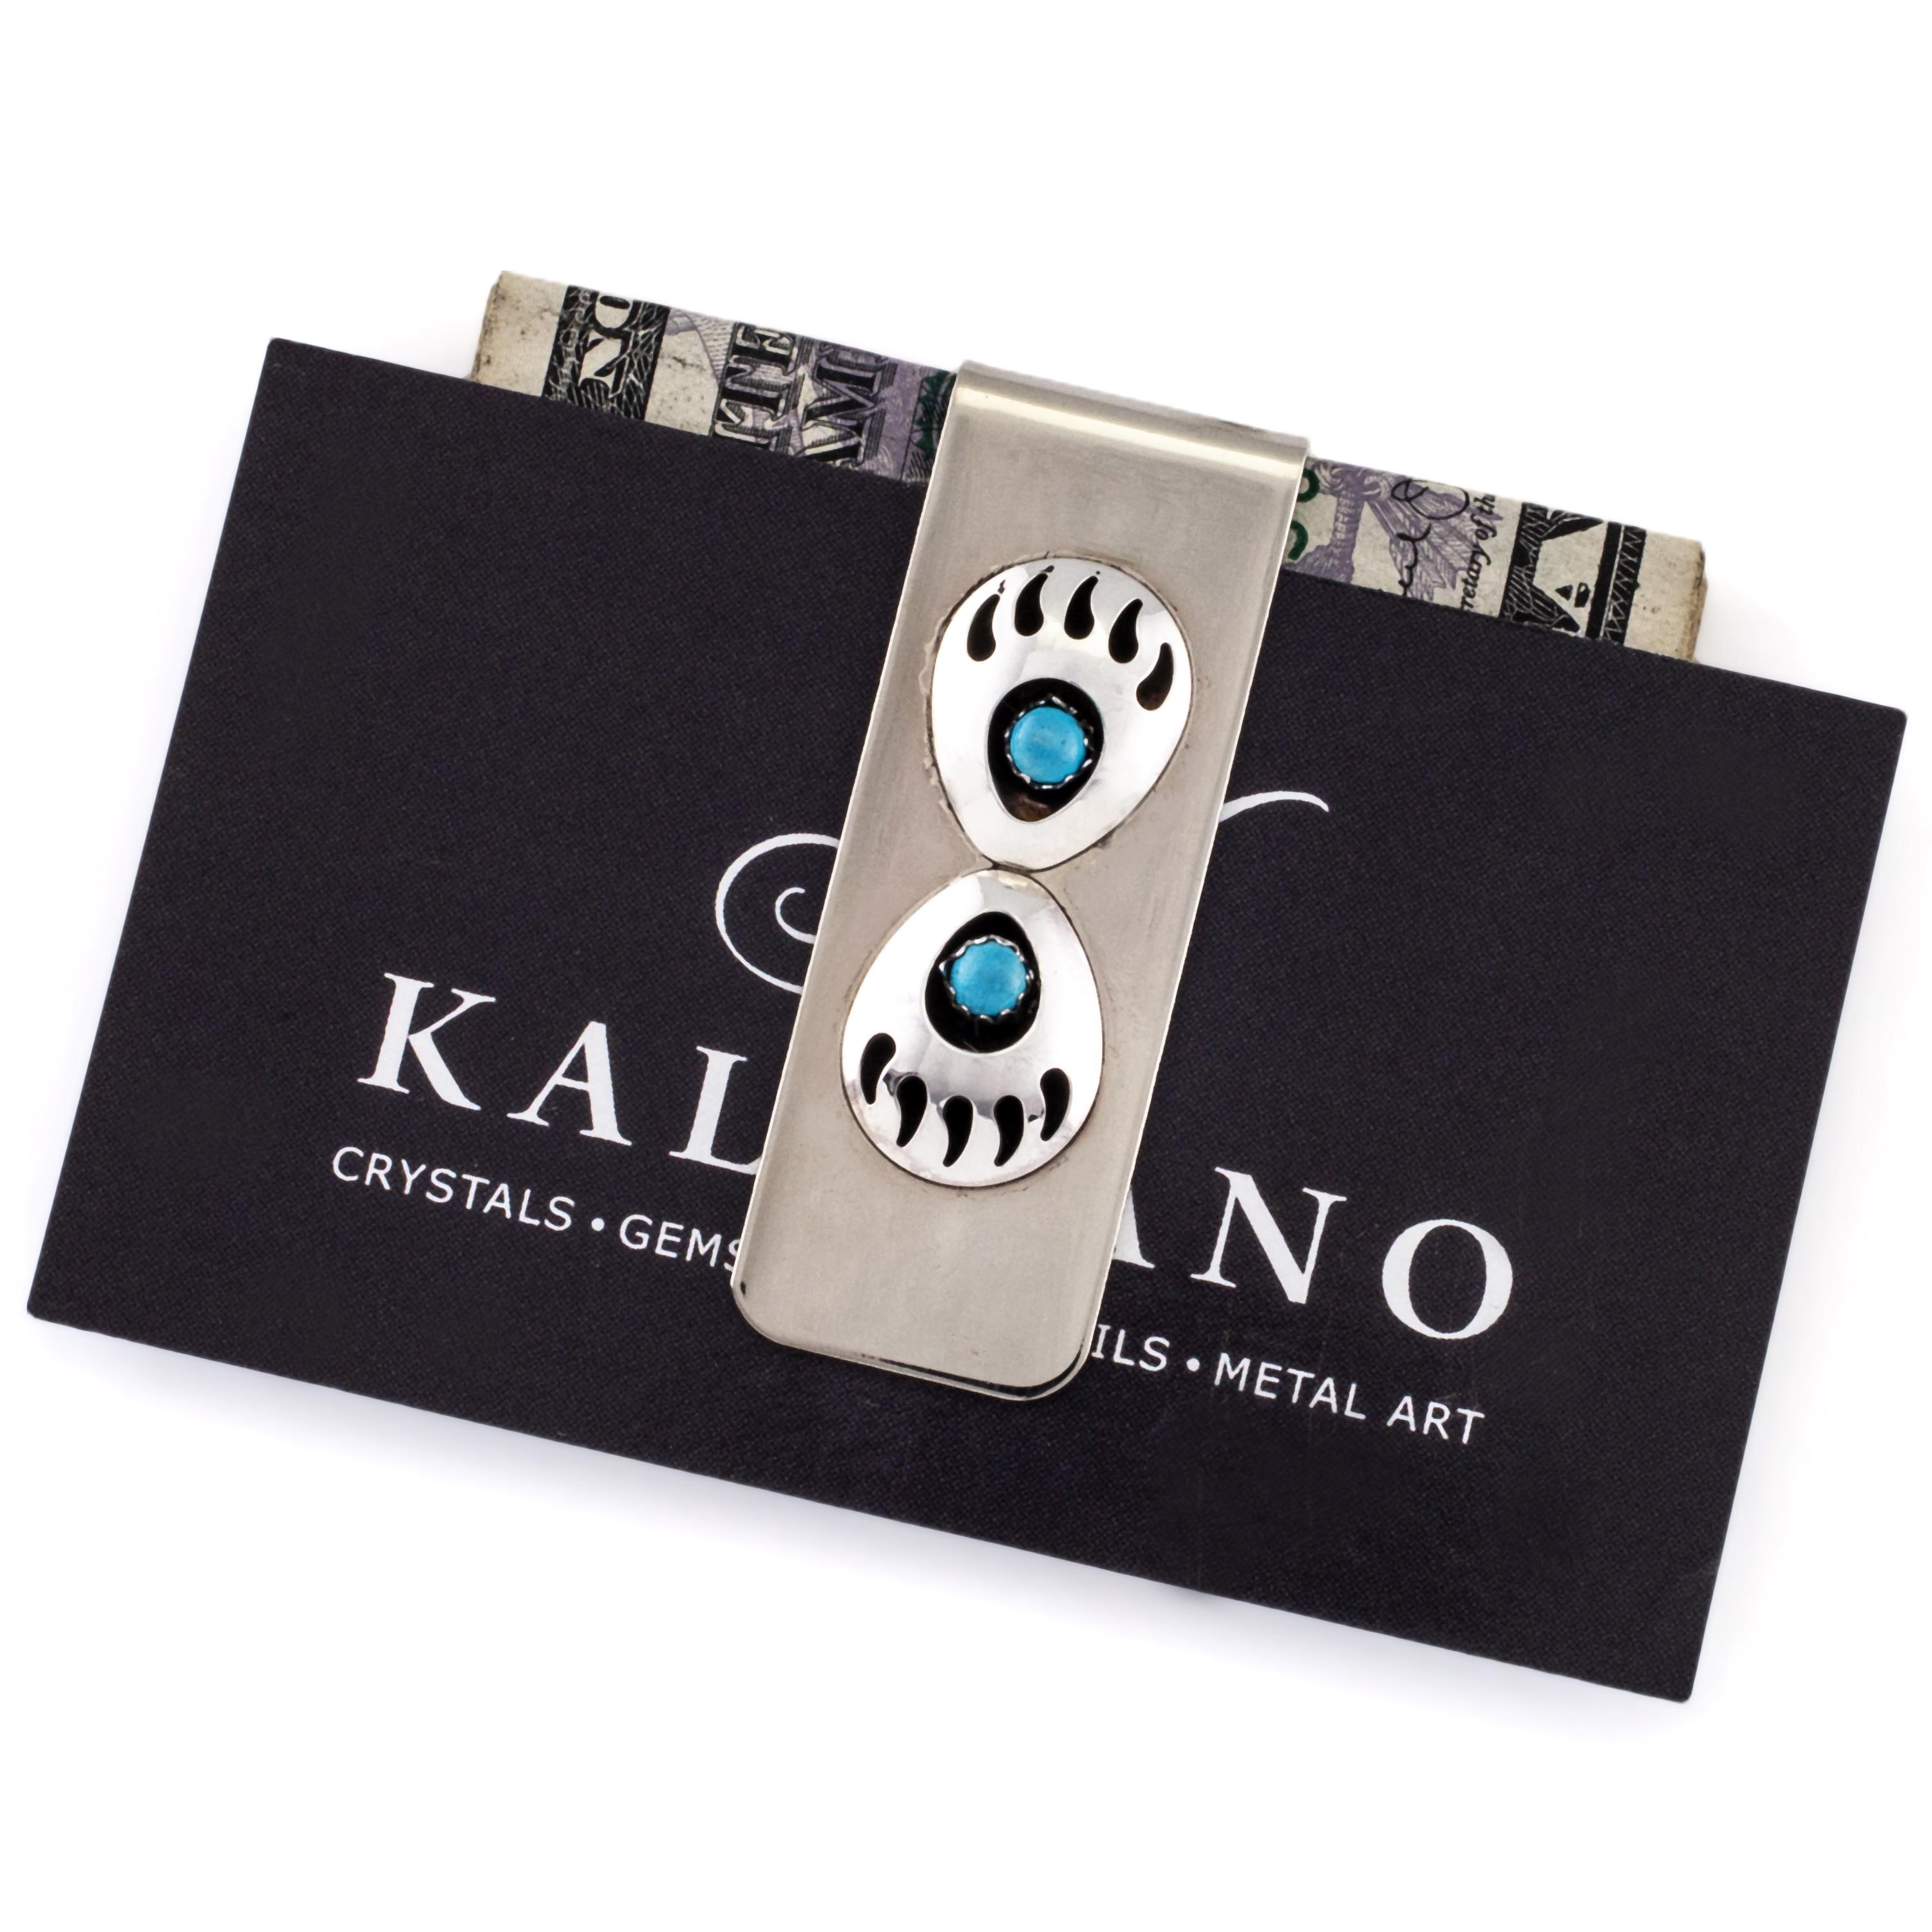 Kalifano Native American Jewelry Virginia Long Double Bear Paw wih Turquoise Inlay USA Native American Made 925 Sterling Silver Money Clip NAM90.003